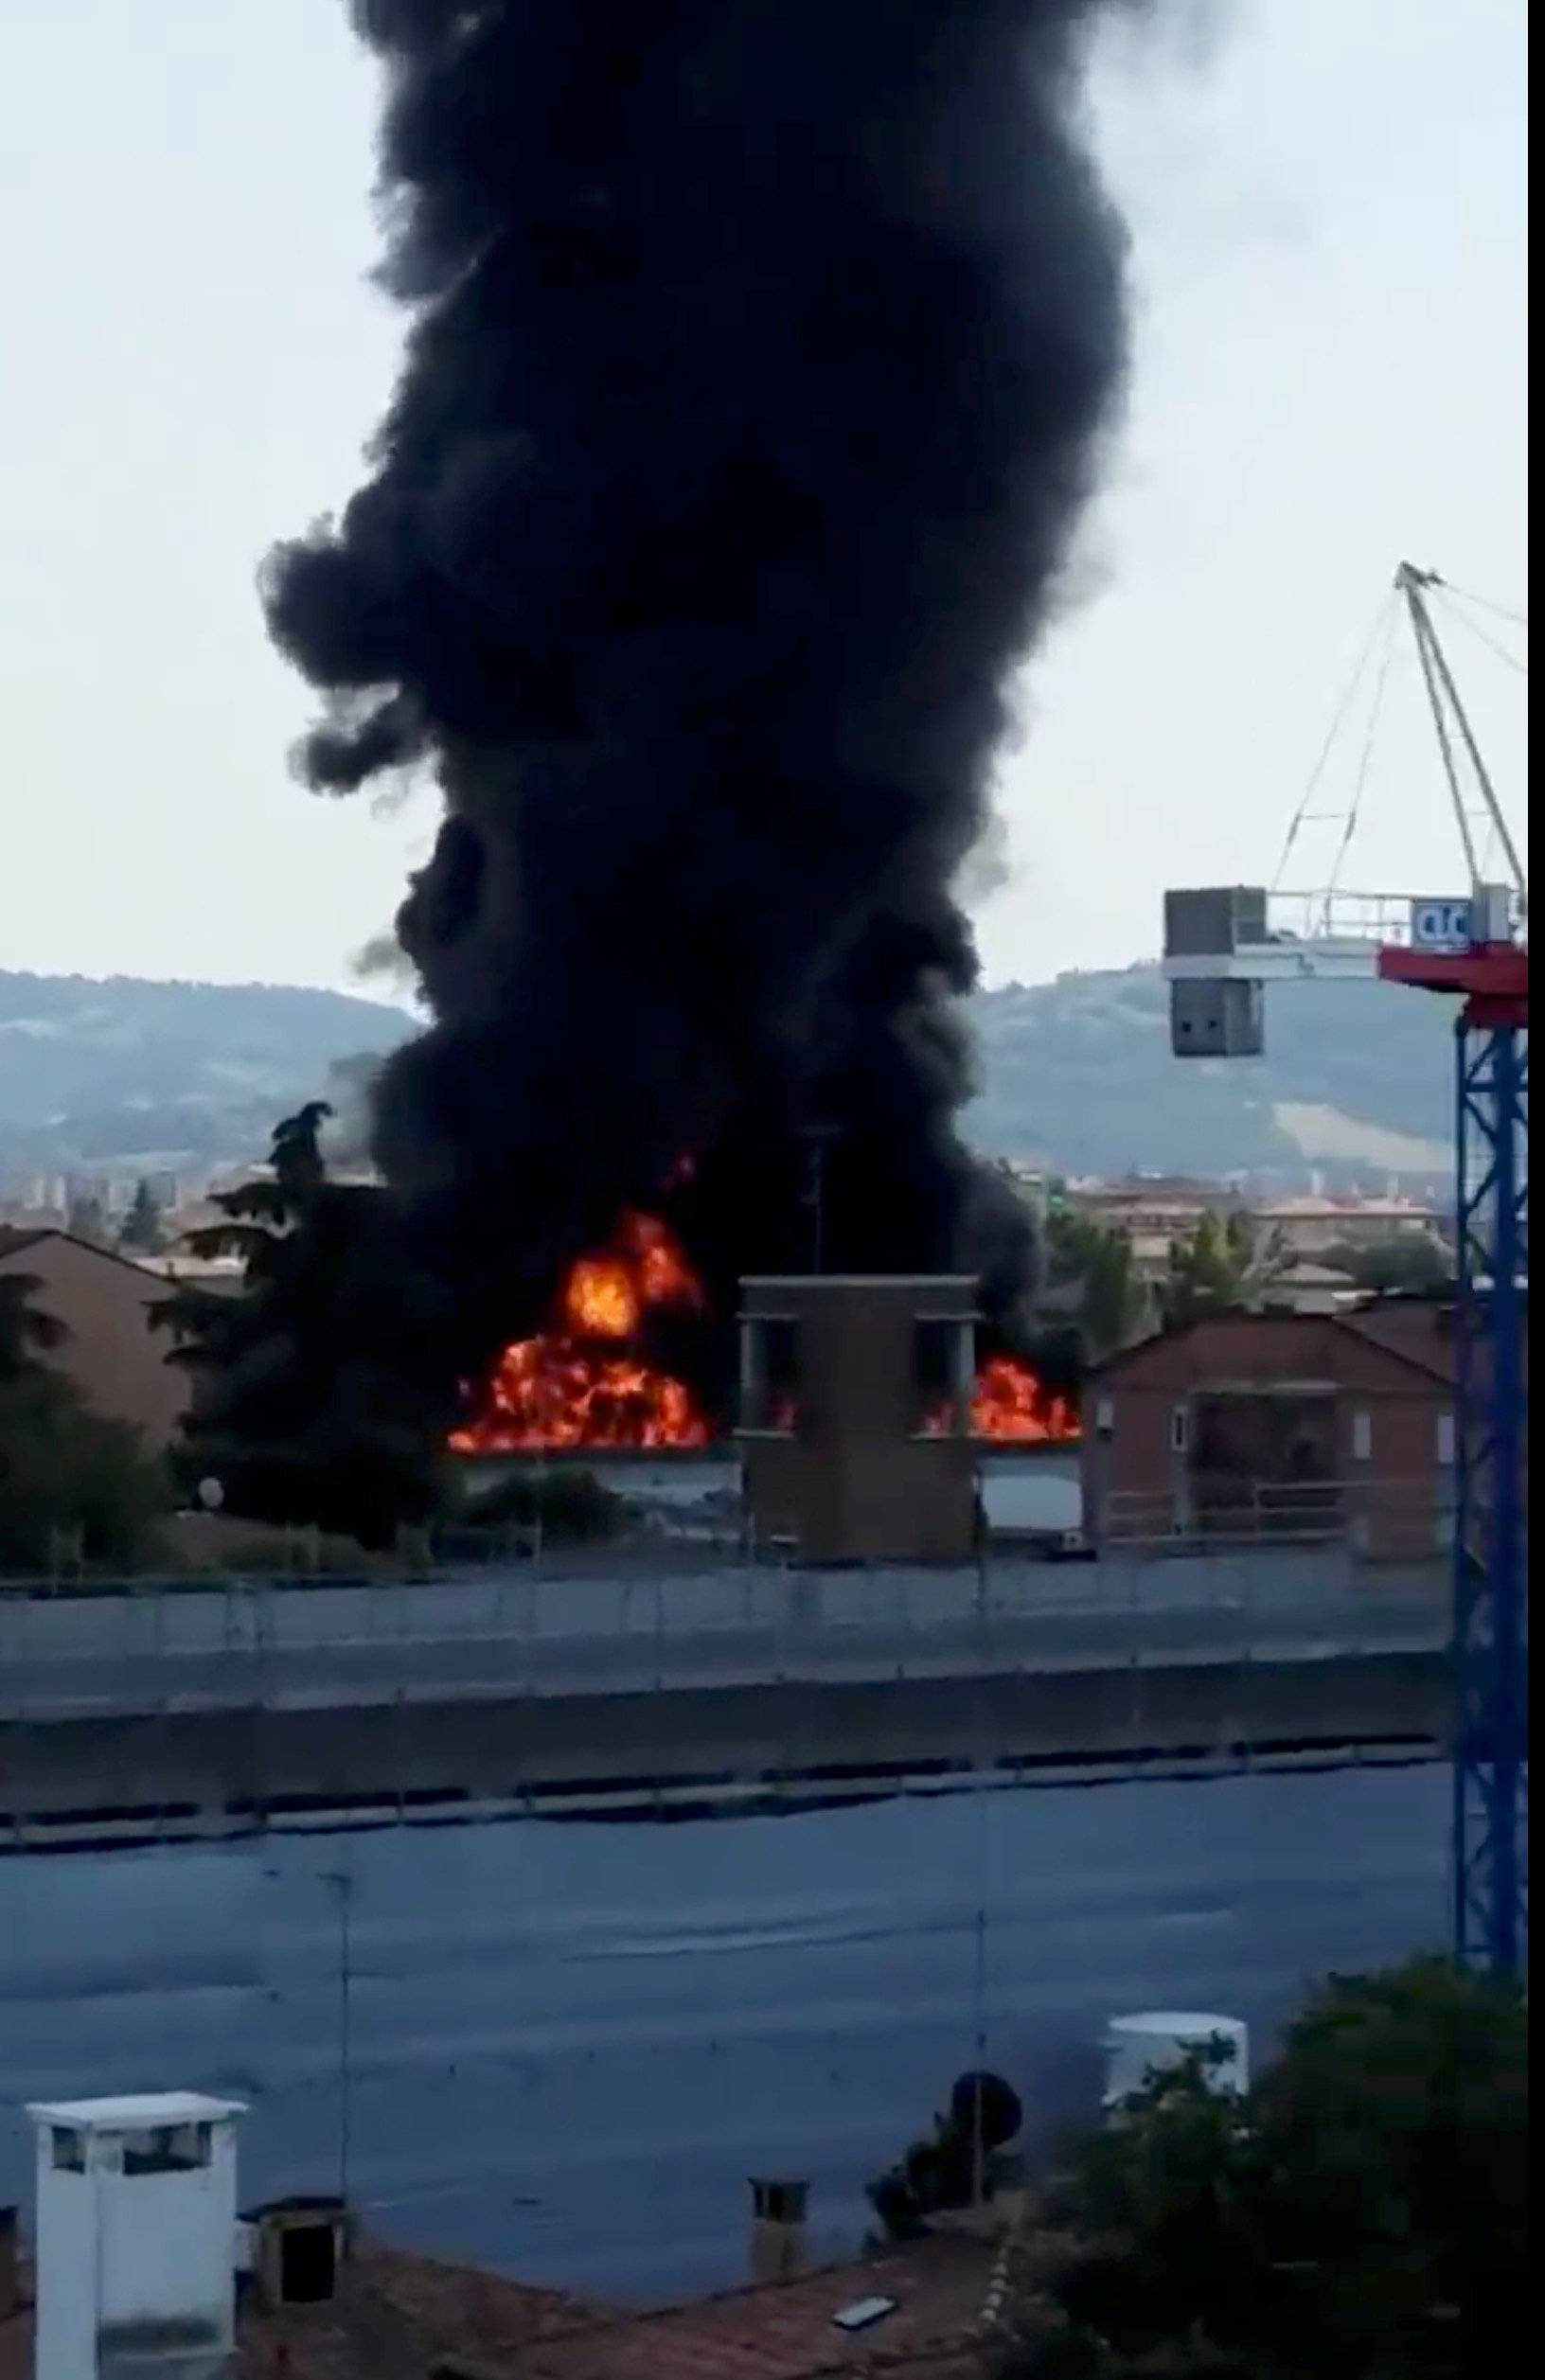 A fire is seen after an accident caused a large explosion at Borgo Panigale, on the outskirts of Bologna